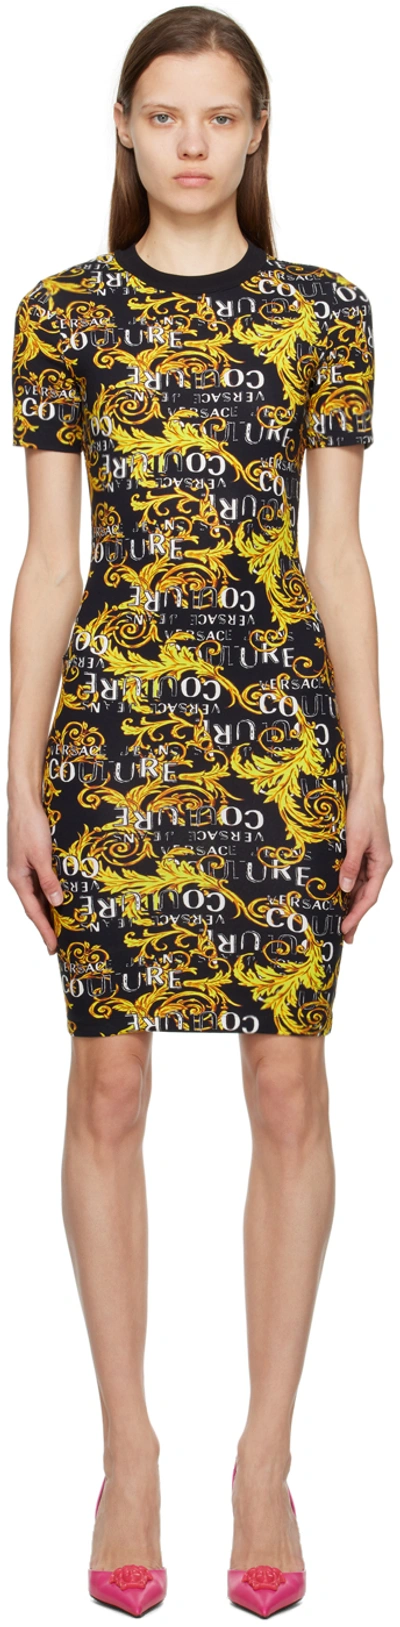 Versace Jeans Couture Black Graphic Minidress In Eg89 Black/gold